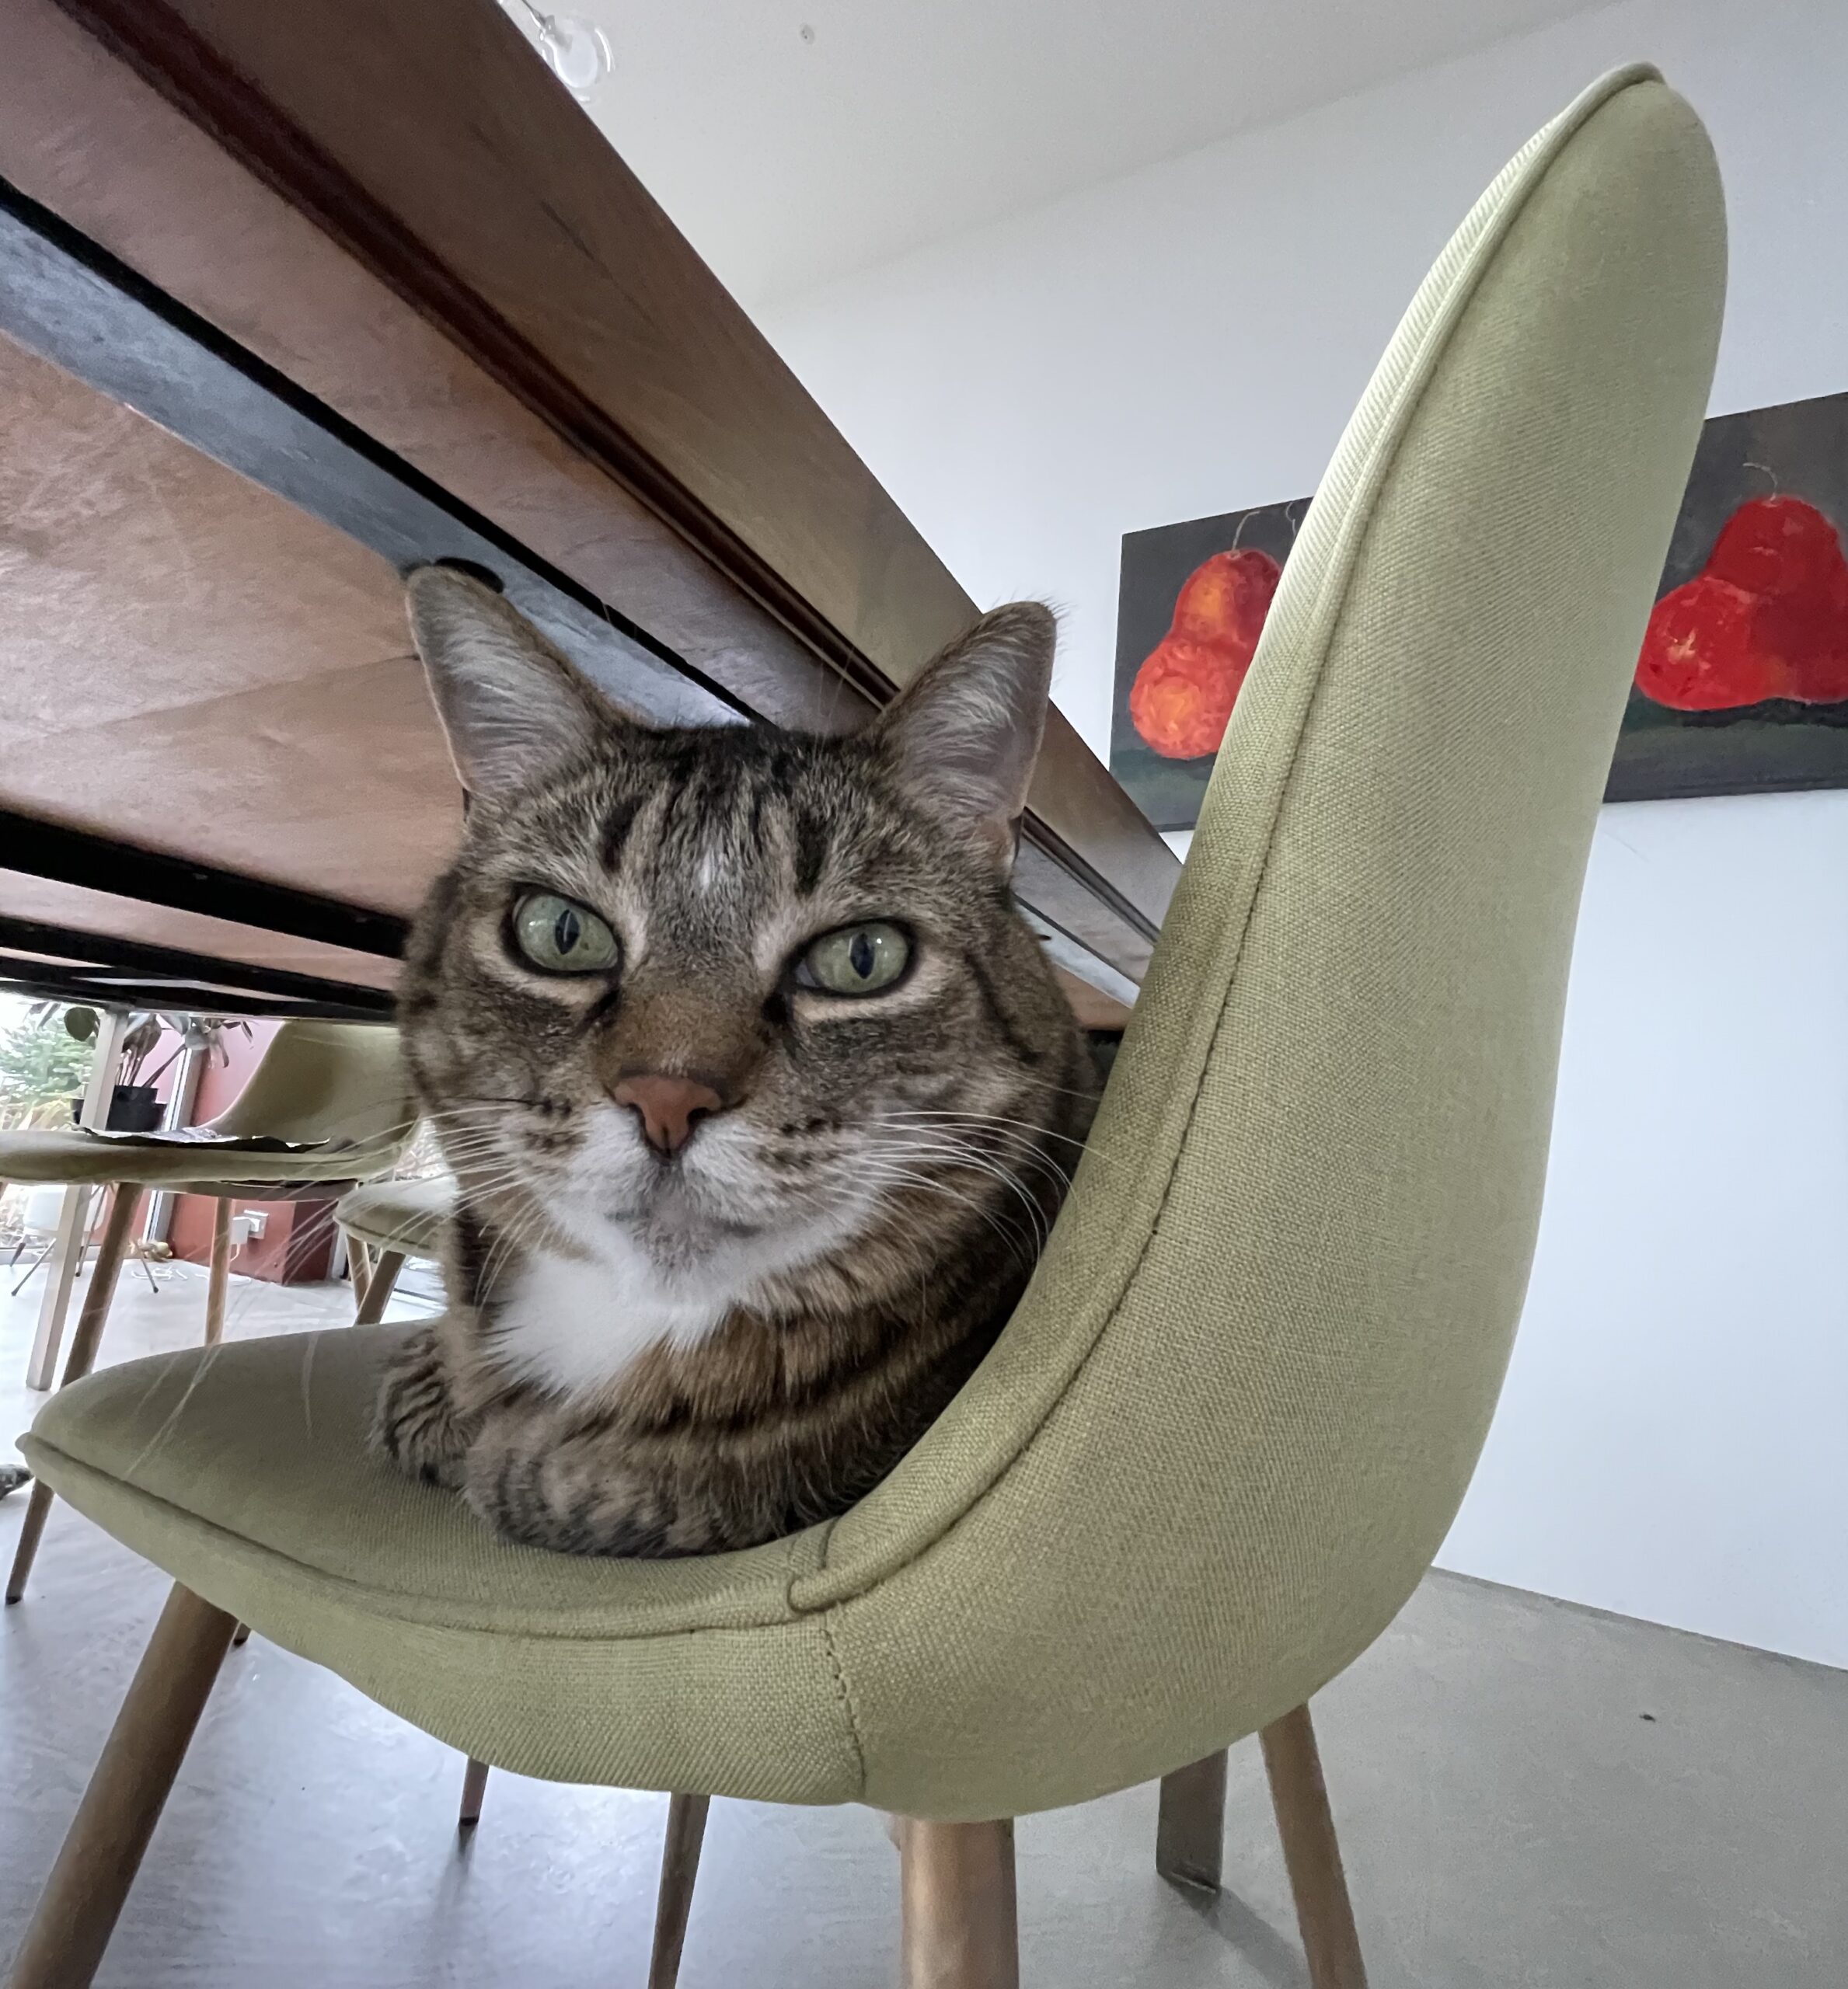 Our cat Henry sitting on a chair